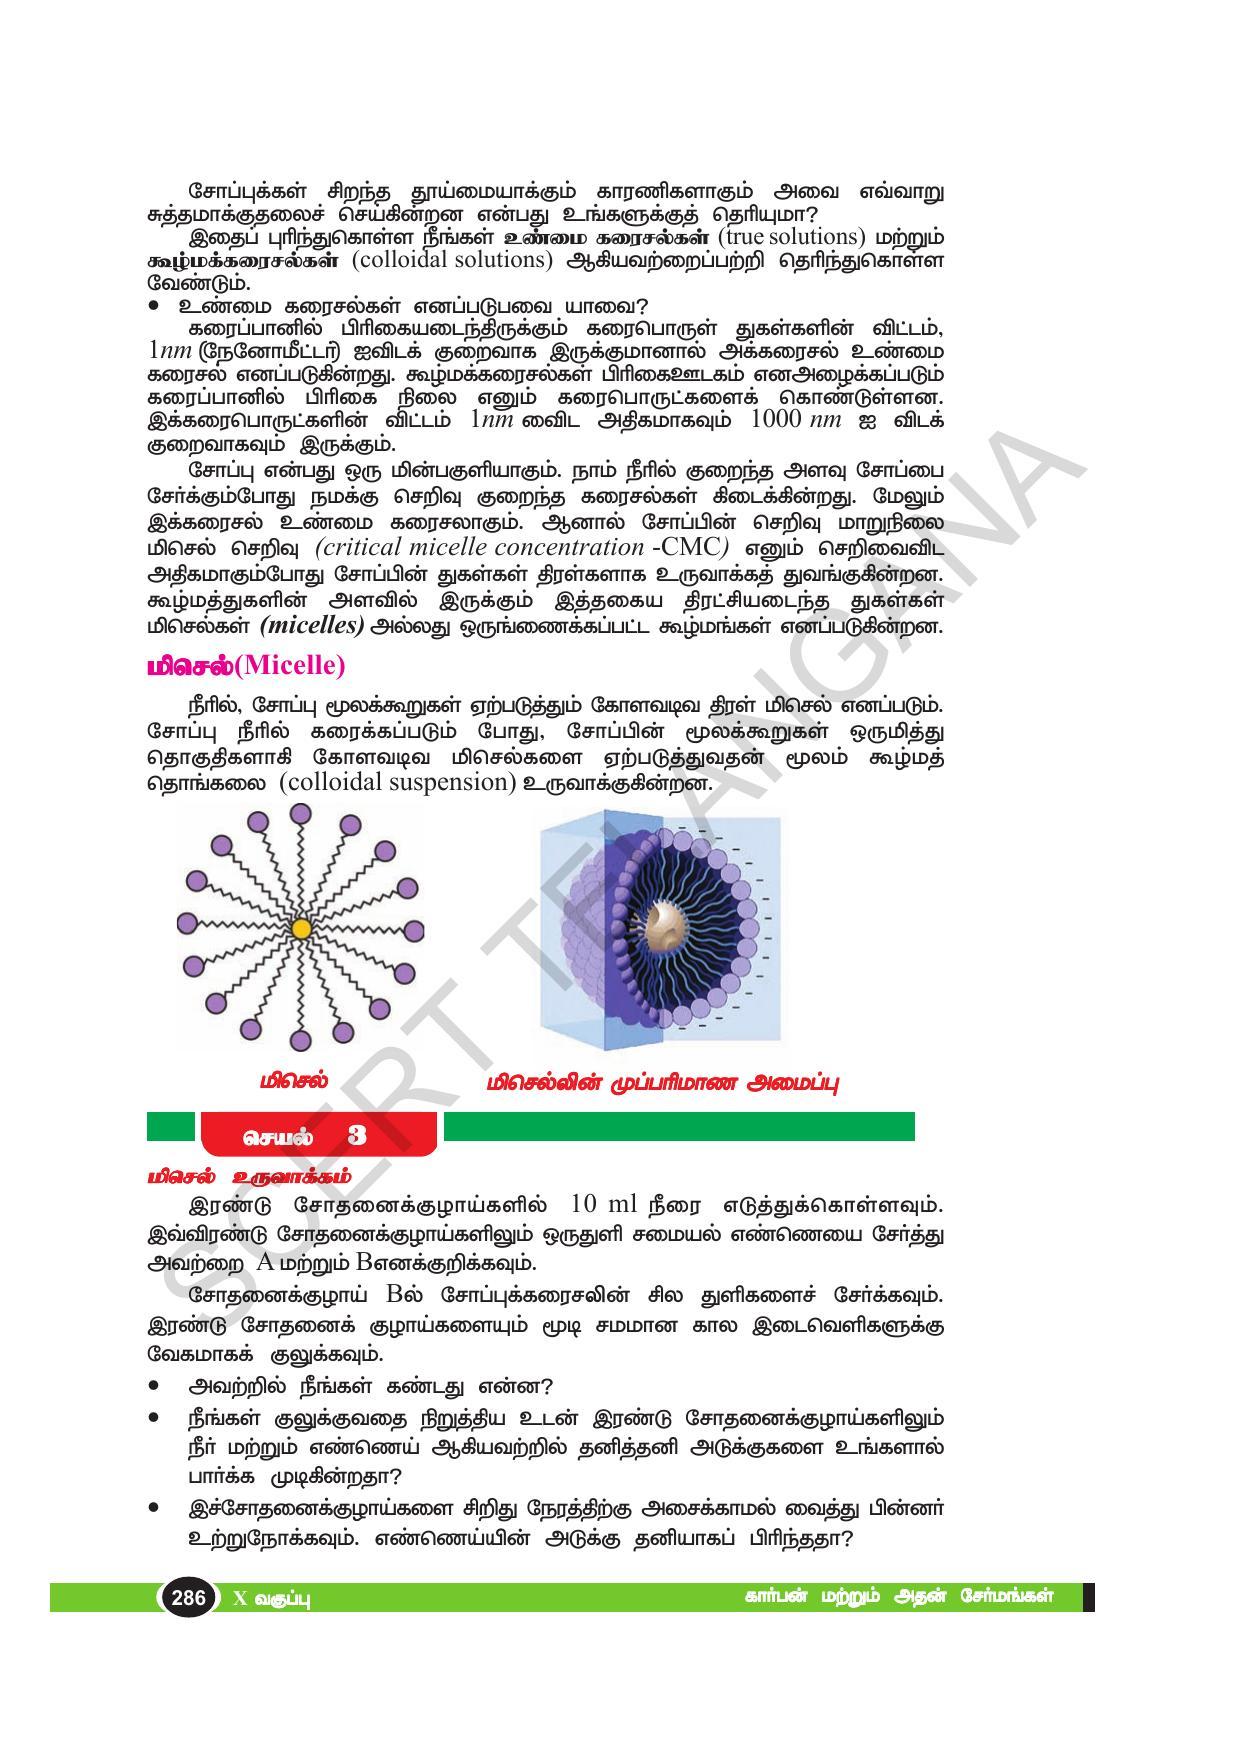 TS SCERT Class 10 Physical Science(Tamil Medium) Text Book - Page 298